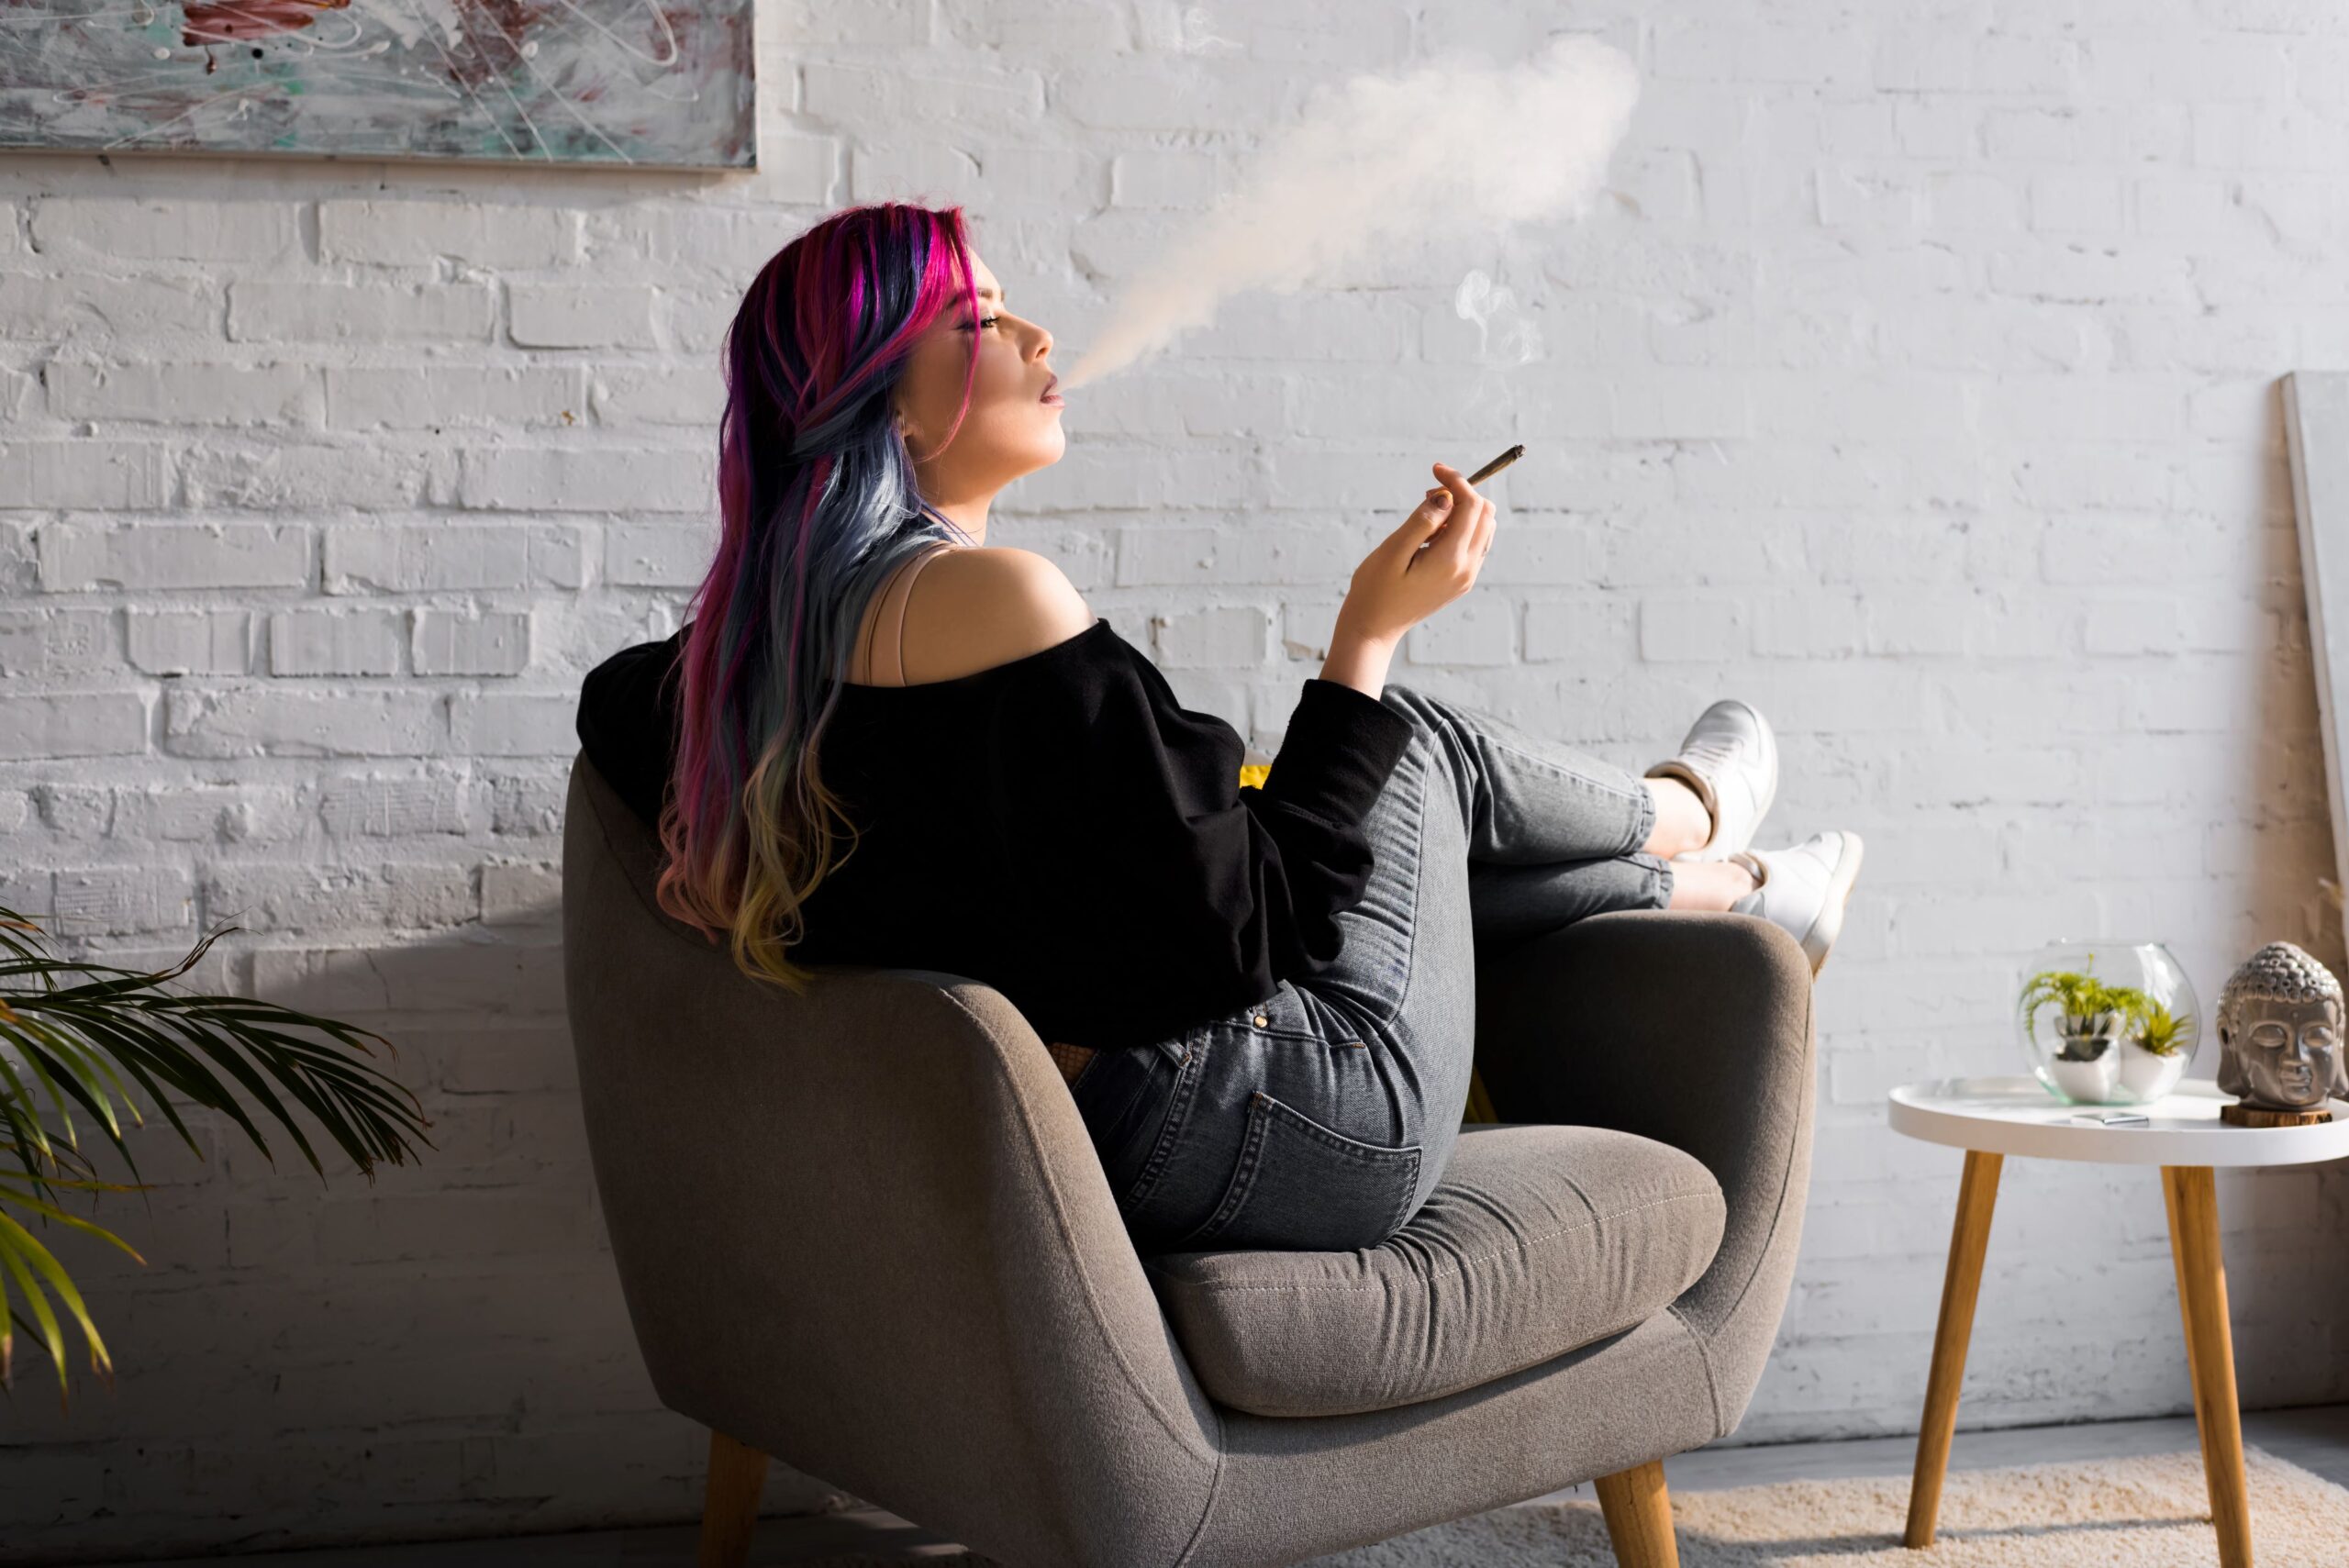 A woman lounging in a chair while blowing smoke from a joint